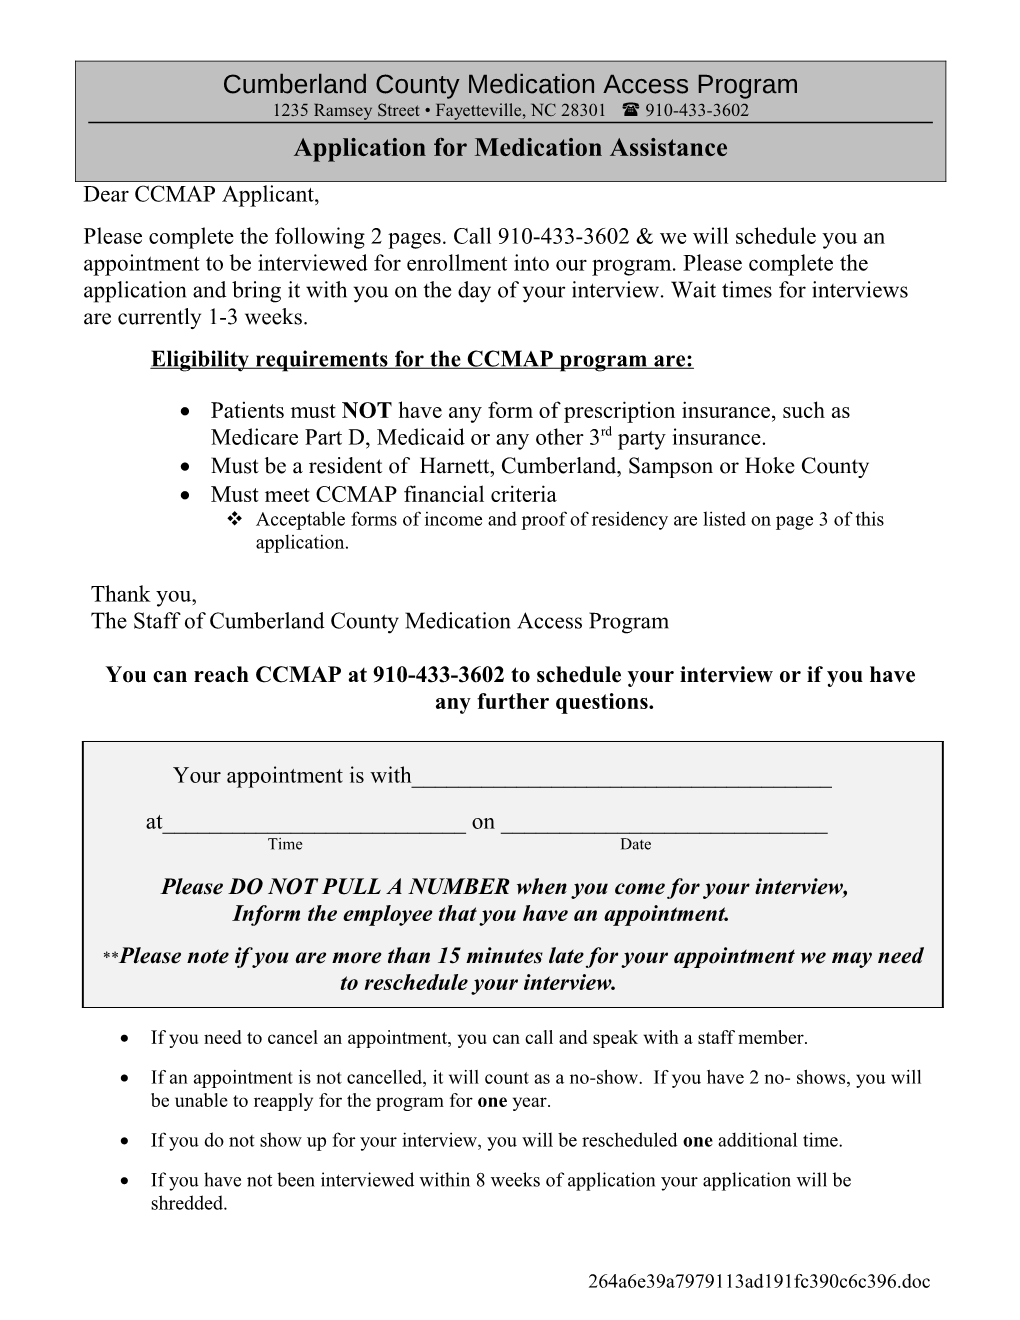 Eligibility Requirements for the CCMAP Program Are